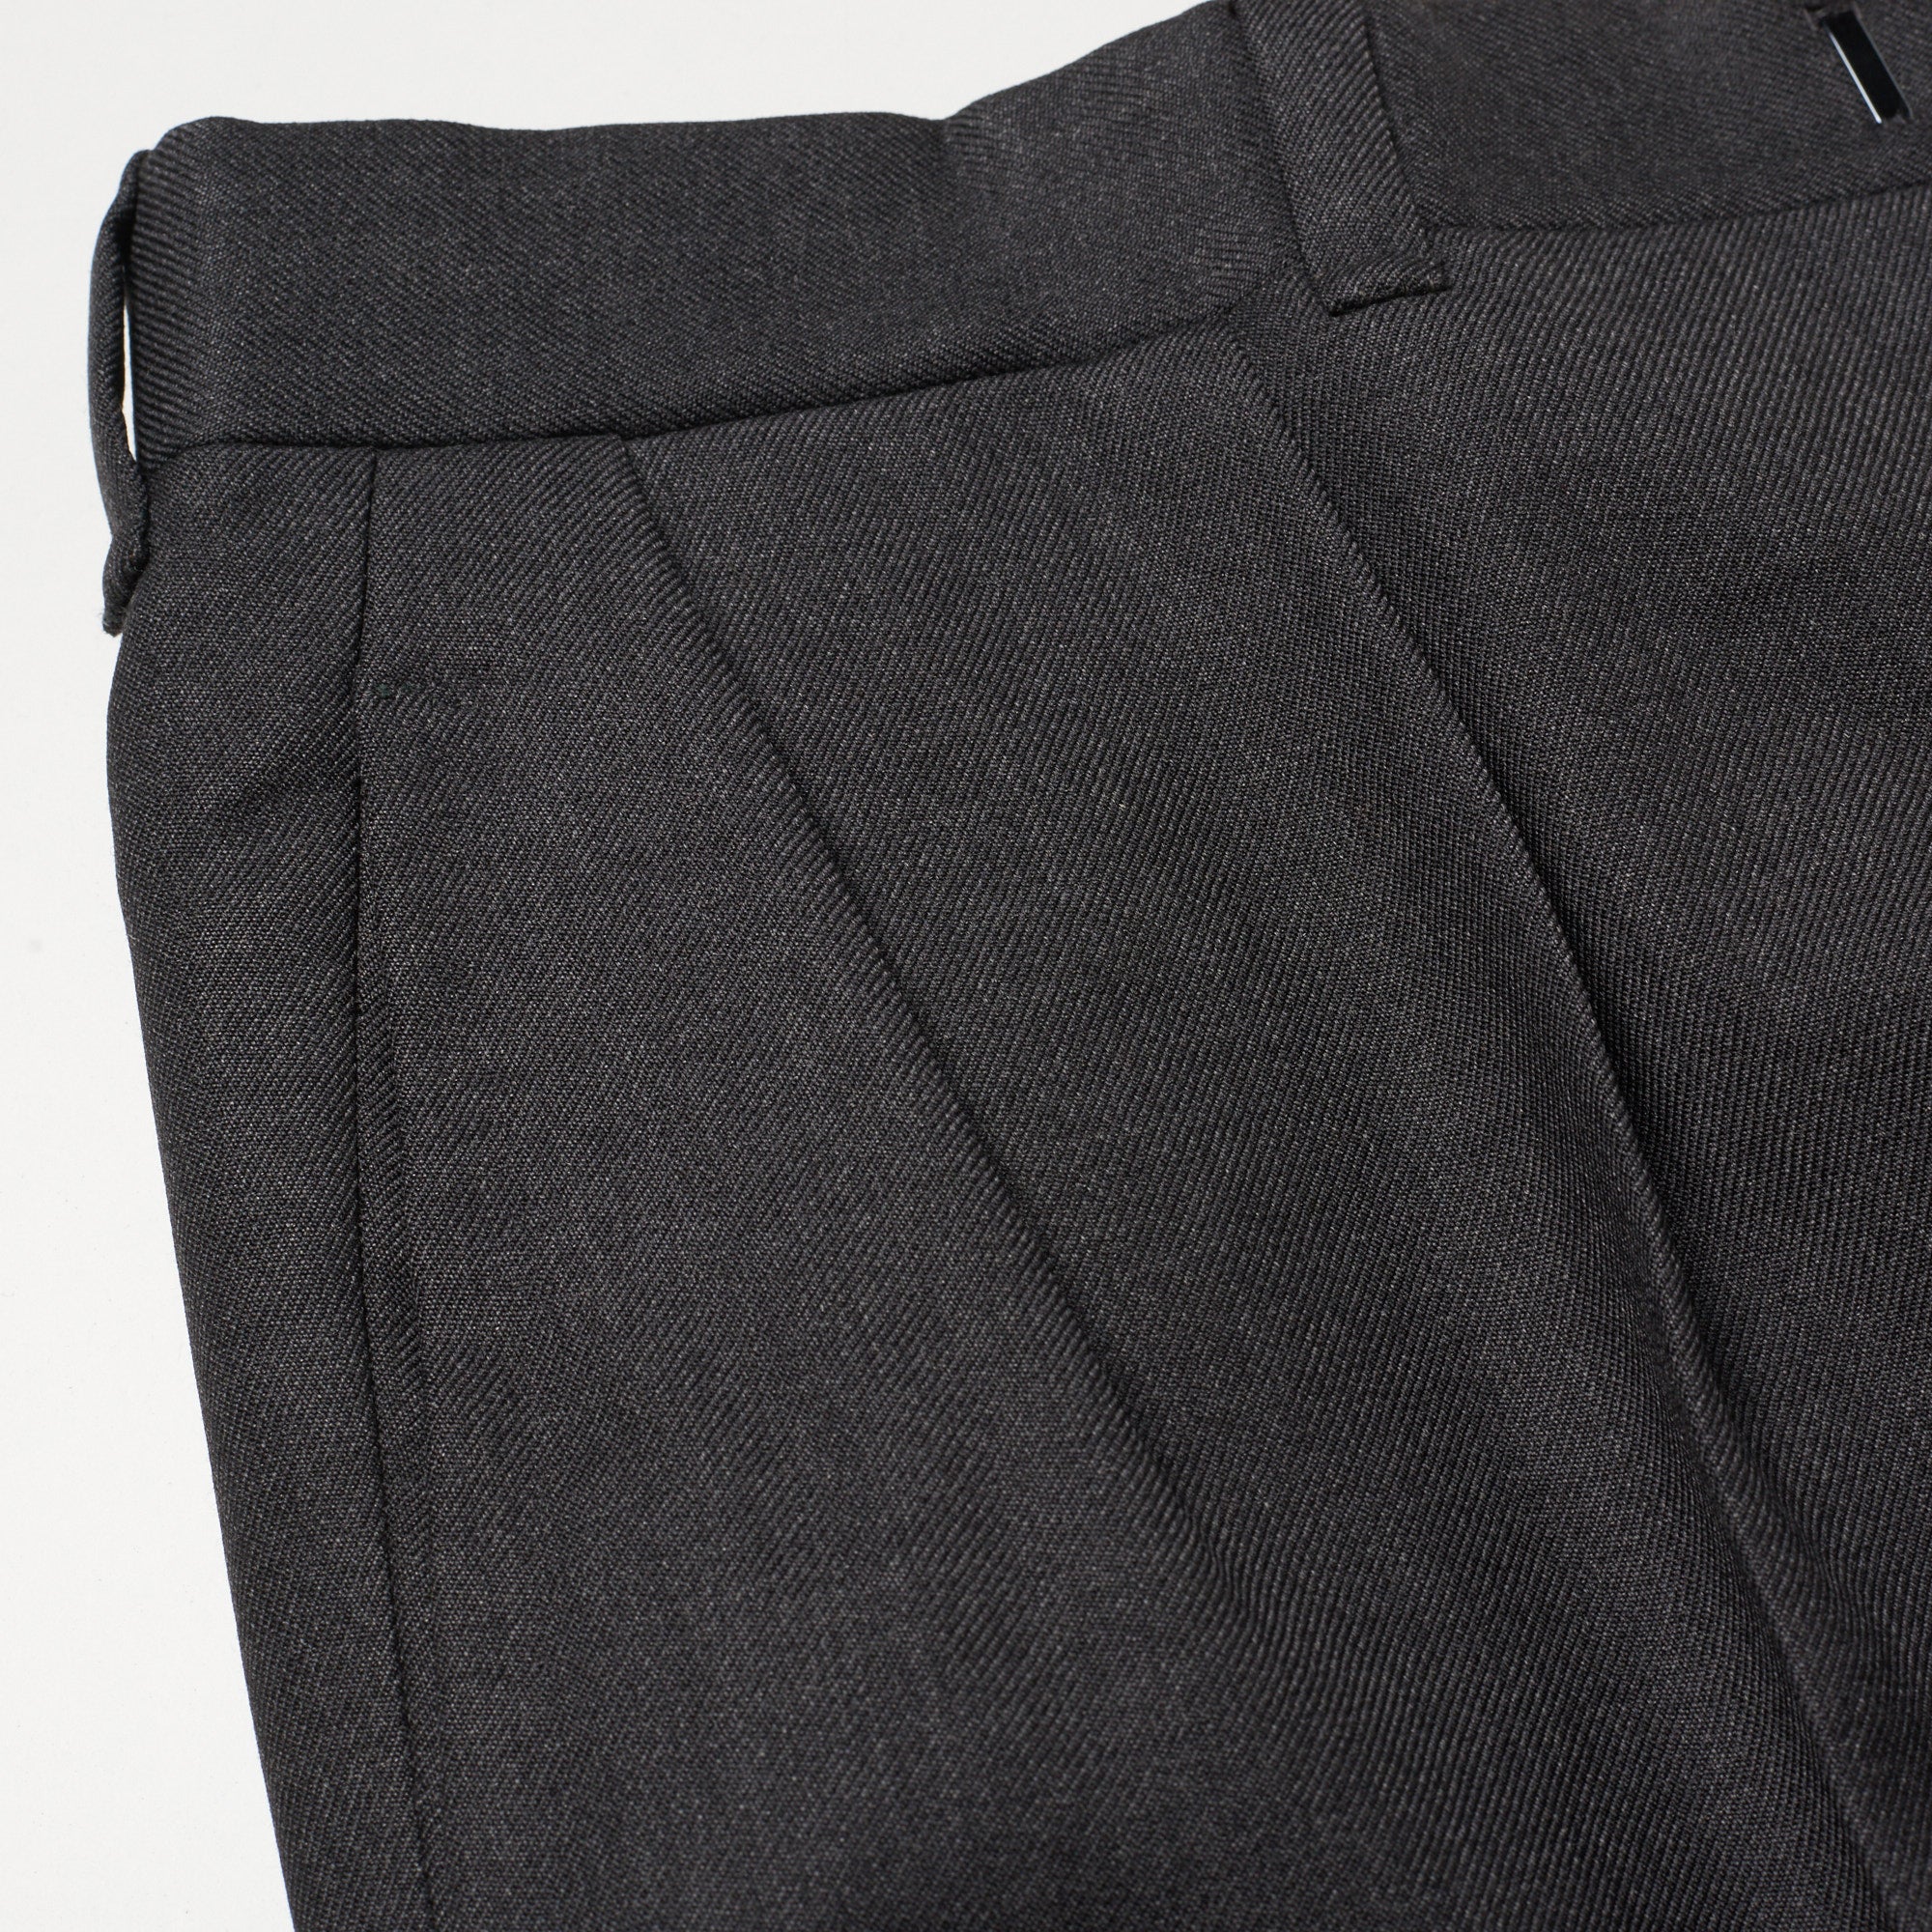 Mens Tailored Trousers & Custom Suit Pants | Collars & Cuffs